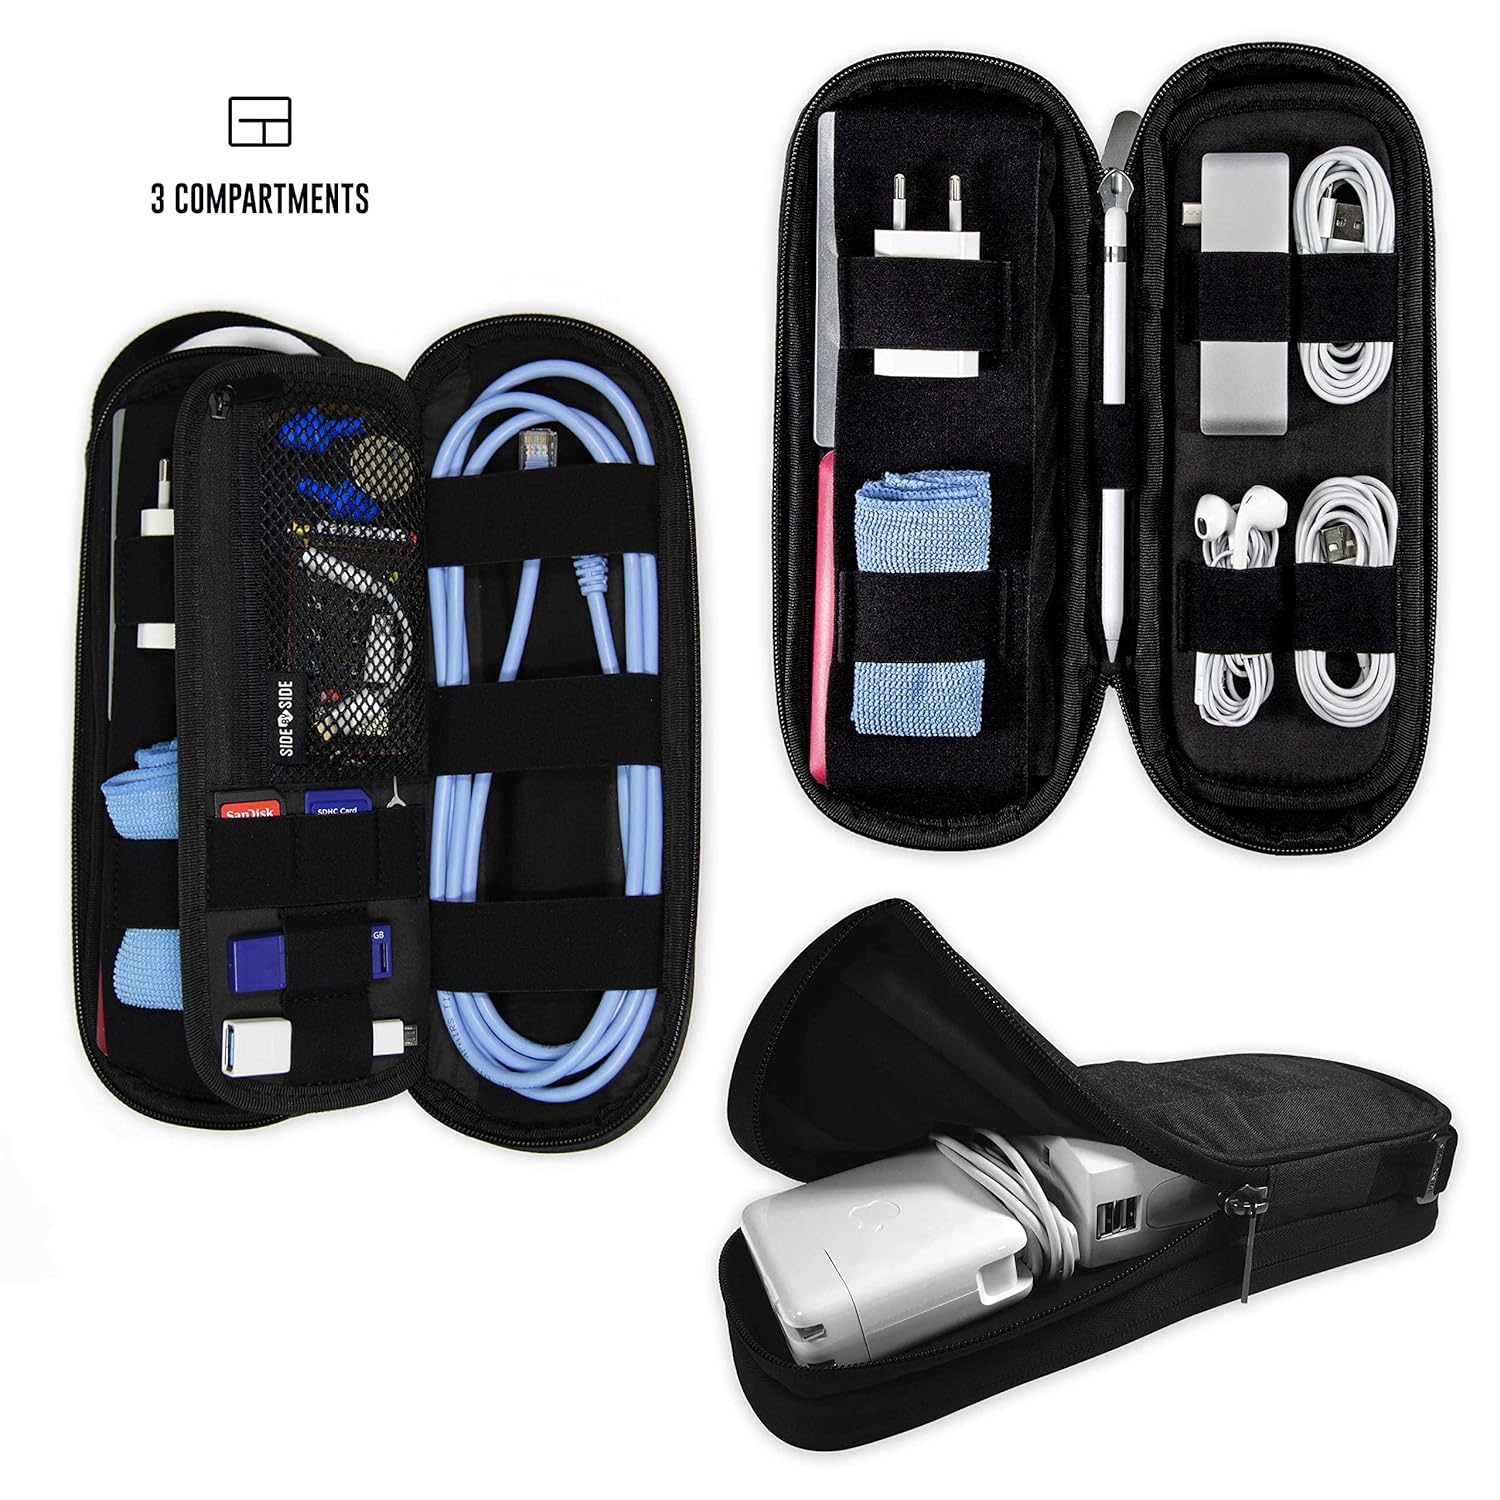 Travel Tech Bag Organizer - Cables & EDC Gear Pouch - Electronics & Cord Case. POWER PACKER by SIDE BY SIDE